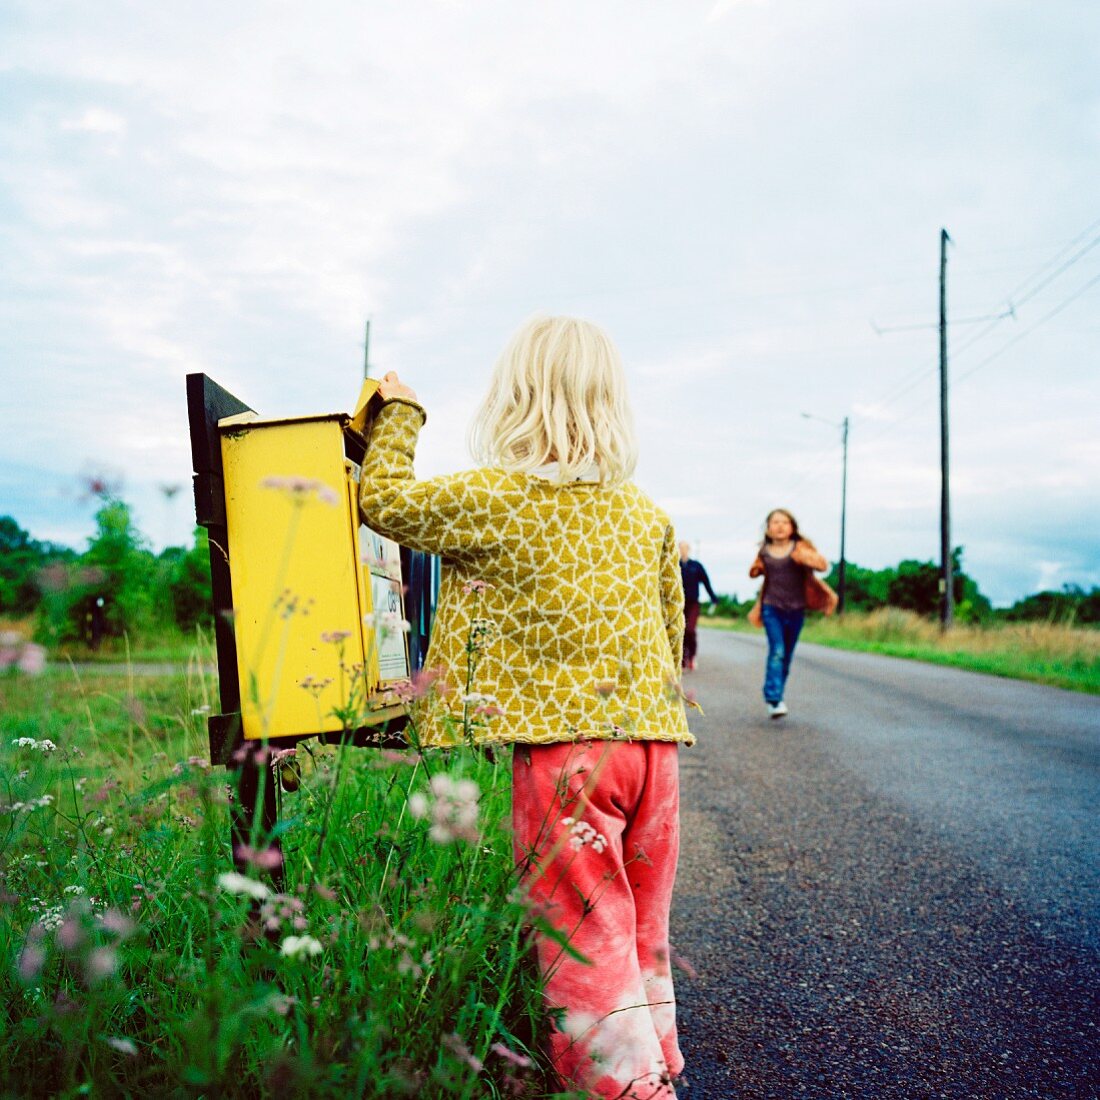 Girl standing by a mail box, Oland, Sweden